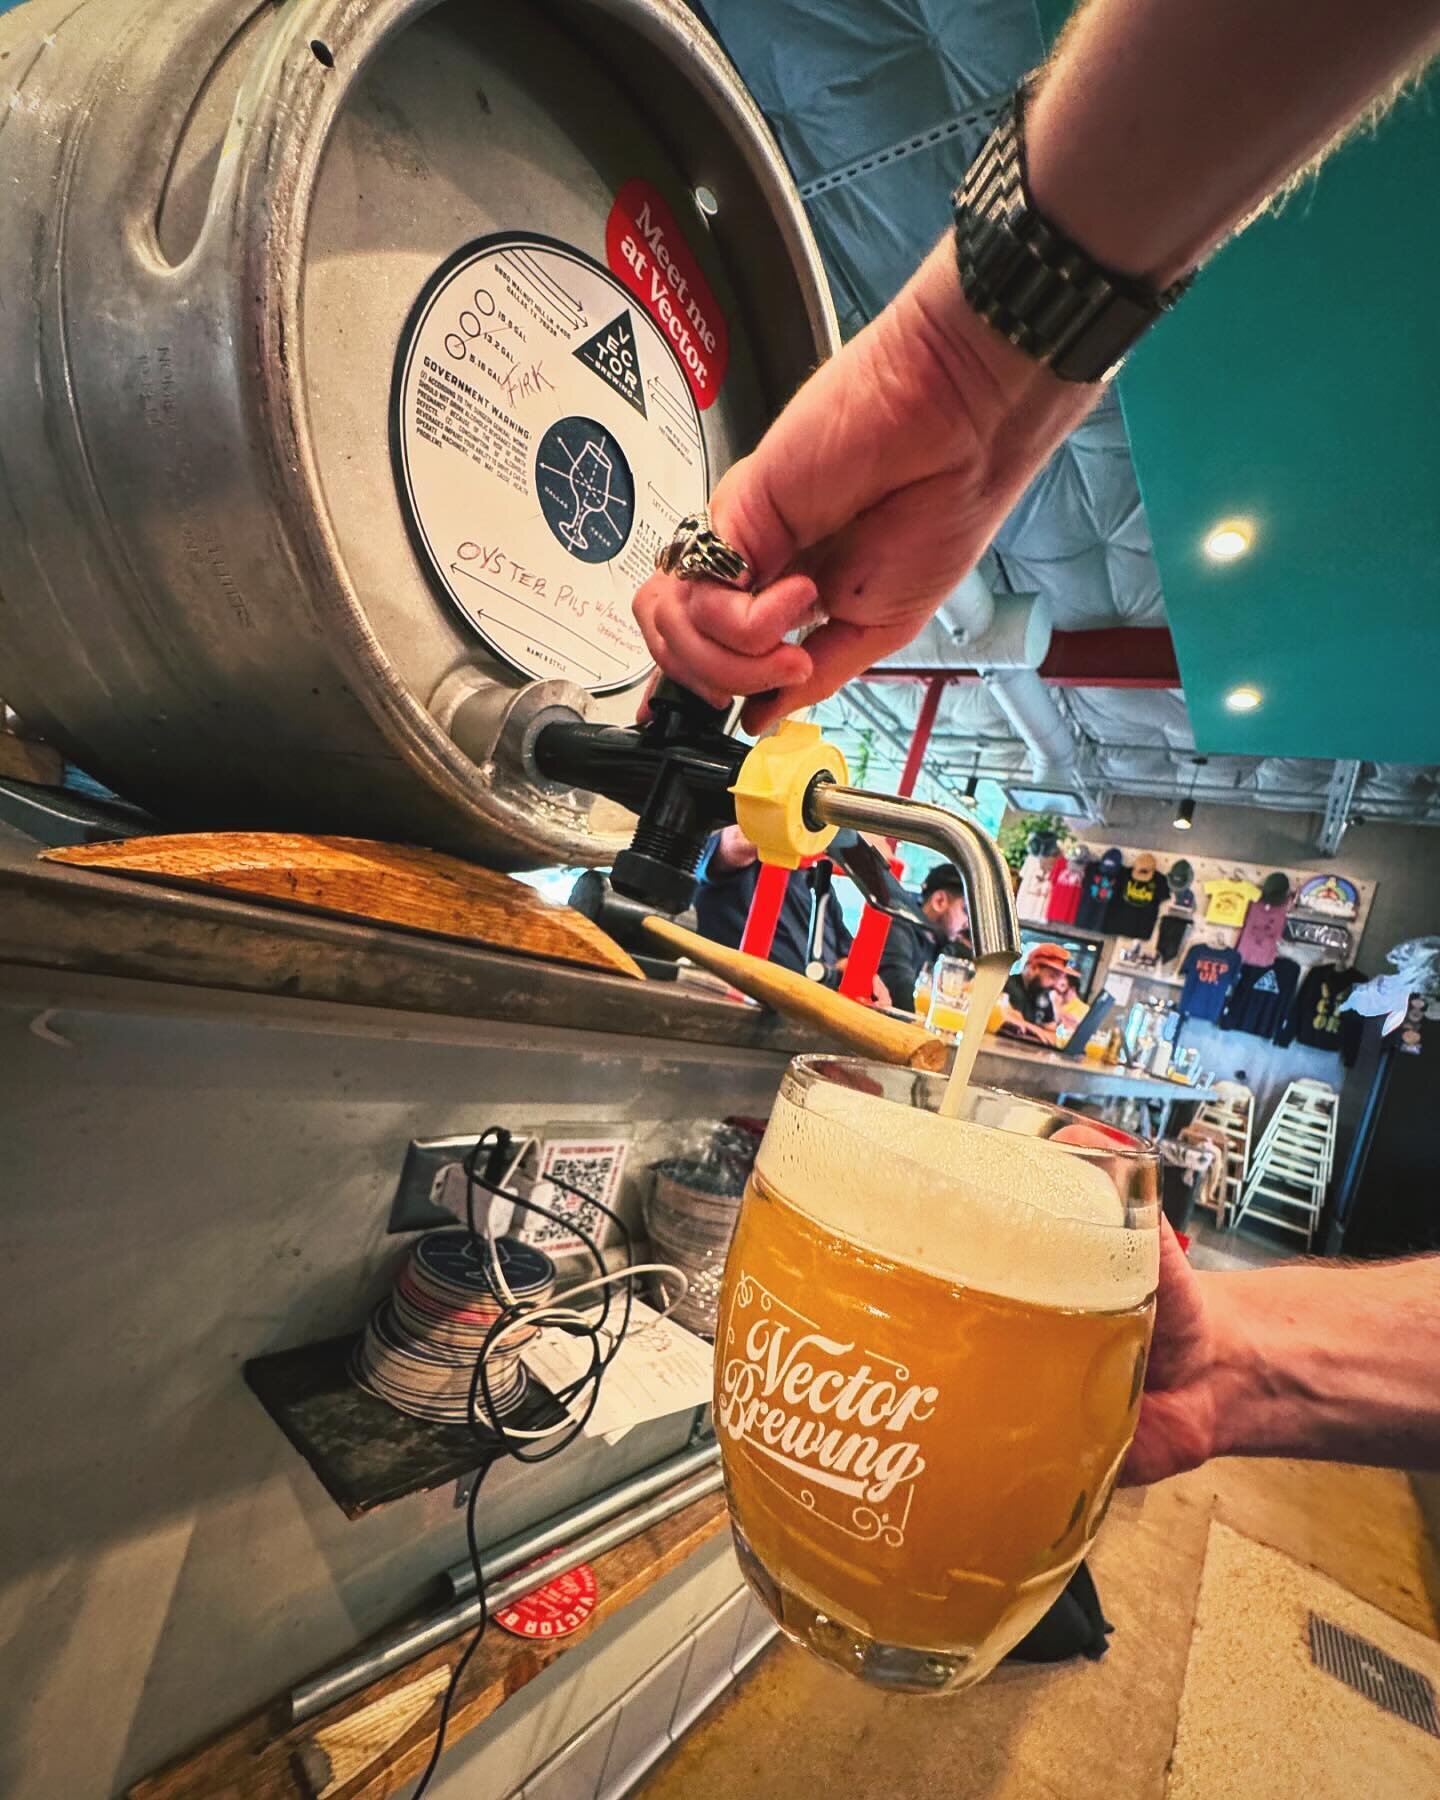 It&rsquo;s Firkin Friday! We just tapped a fresh cask of 🦪UMBO🦪 oyster pilsner conditioned on cherrywood and sugar maple, and this thang is shuckin&rsquo; awesome! Did I mention mug pours are only $4?🙌 Get it while we got it, cause it&rsquo;s not 